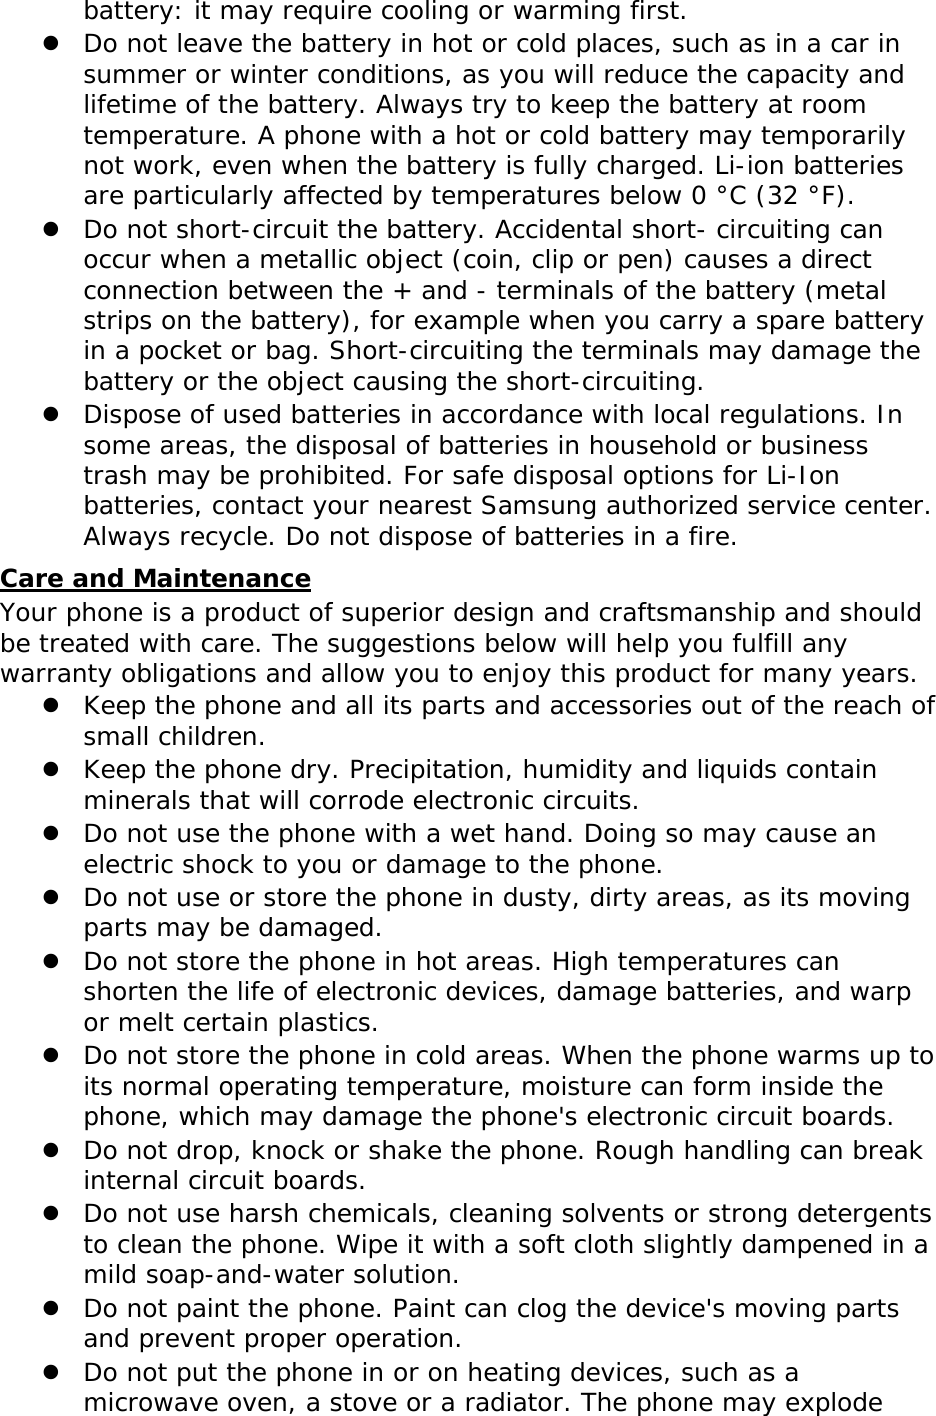 battery: it may require cooling or warming first.  Do not leave the battery in hot or cold places, such as in a car in summer or winter conditions, as you will reduce the capacity and lifetime of the battery. Always try to keep the battery at room temperature. A phone with a hot or cold battery may temporarily not work, even when the battery is fully charged. Li-ion batteries are particularly affected by temperatures below 0 °C (32 °F).  Do not short-circuit the battery. Accidental short- circuiting can occur when a metallic object (coin, clip or pen) causes a direct connection between the + and - terminals of the battery (metal strips on the battery), for example when you carry a spare battery in a pocket or bag. Short-circuiting the terminals may damage the battery or the object causing the short-circuiting.  Dispose of used batteries in accordance with local regulations. In some areas, the disposal of batteries in household or business trash may be prohibited. For safe disposal options for Li-Ion batteries, contact your nearest Samsung authorized service center. Always recycle. Do not dispose of batteries in a fire. Care and Maintenance Your phone is a product of superior design and craftsmanship and should be treated with care. The suggestions below will help you fulfill any warranty obligations and allow you to enjoy this product for many years.  Keep the phone and all its parts and accessories out of the reach of small children.  Keep the phone dry. Precipitation, humidity and liquids contain minerals that will corrode electronic circuits.  Do not use the phone with a wet hand. Doing so may cause an electric shock to you or damage to the phone.  Do not use or store the phone in dusty, dirty areas, as its moving parts may be damaged.  Do not store the phone in hot areas. High temperatures can shorten the life of electronic devices, damage batteries, and warp or melt certain plastics.  Do not store the phone in cold areas. When the phone warms up to its normal operating temperature, moisture can form inside the phone, which may damage the phone&apos;s electronic circuit boards.  Do not drop, knock or shake the phone. Rough handling can break internal circuit boards.  Do not use harsh chemicals, cleaning solvents or strong detergents to clean the phone. Wipe it with a soft cloth slightly dampened in a mild soap-and-water solution.  Do not paint the phone. Paint can clog the device&apos;s moving parts and prevent proper operation.  Do not put the phone in or on heating devices, such as a microwave oven, a stove or a radiator. The phone may explode 